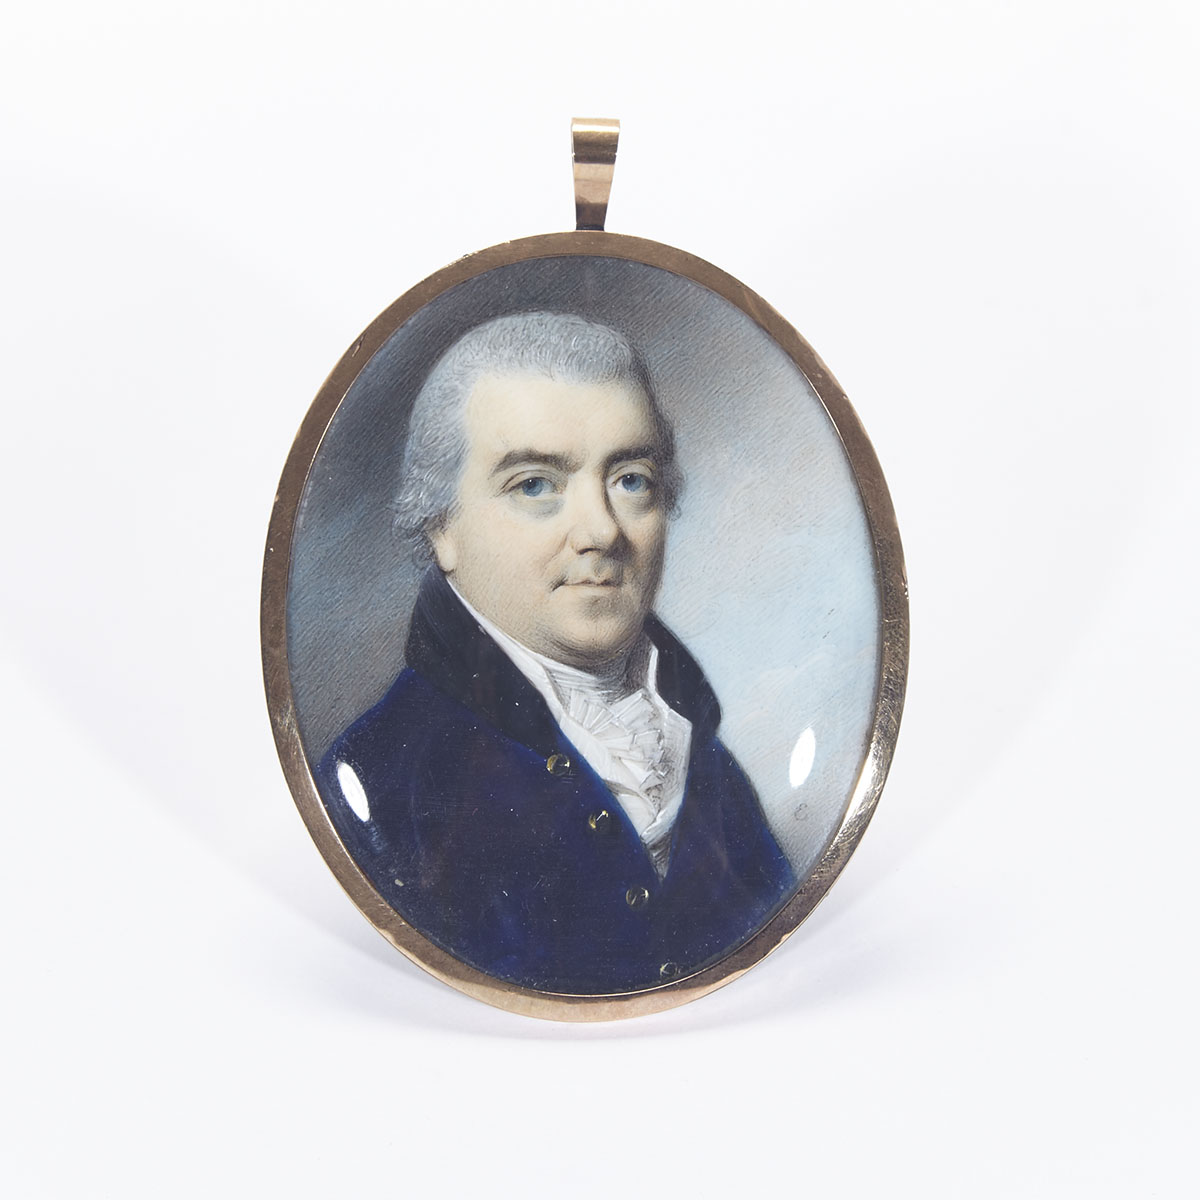 George Engleheart (British, 1750-1829) Portrait Miniature of a Gentleman, early 19th century